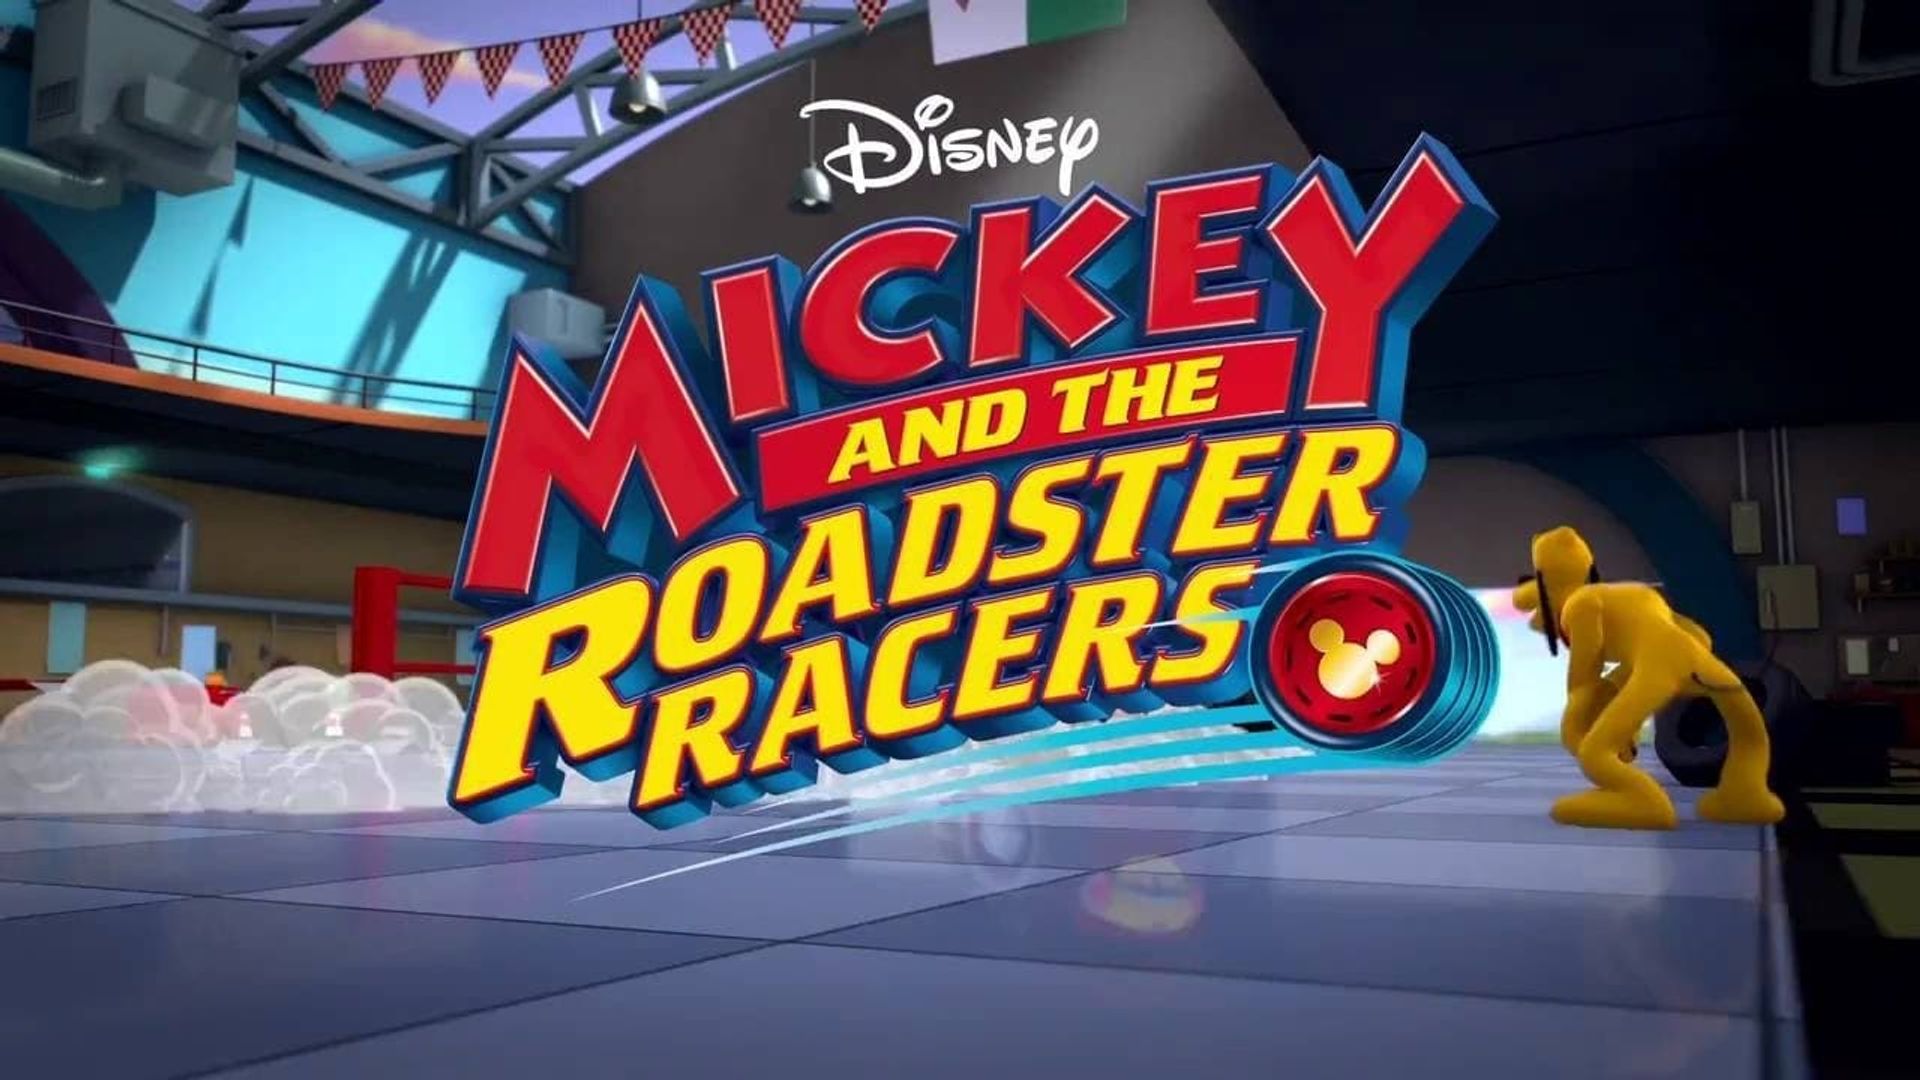 Mickey and the Roadster Racers background